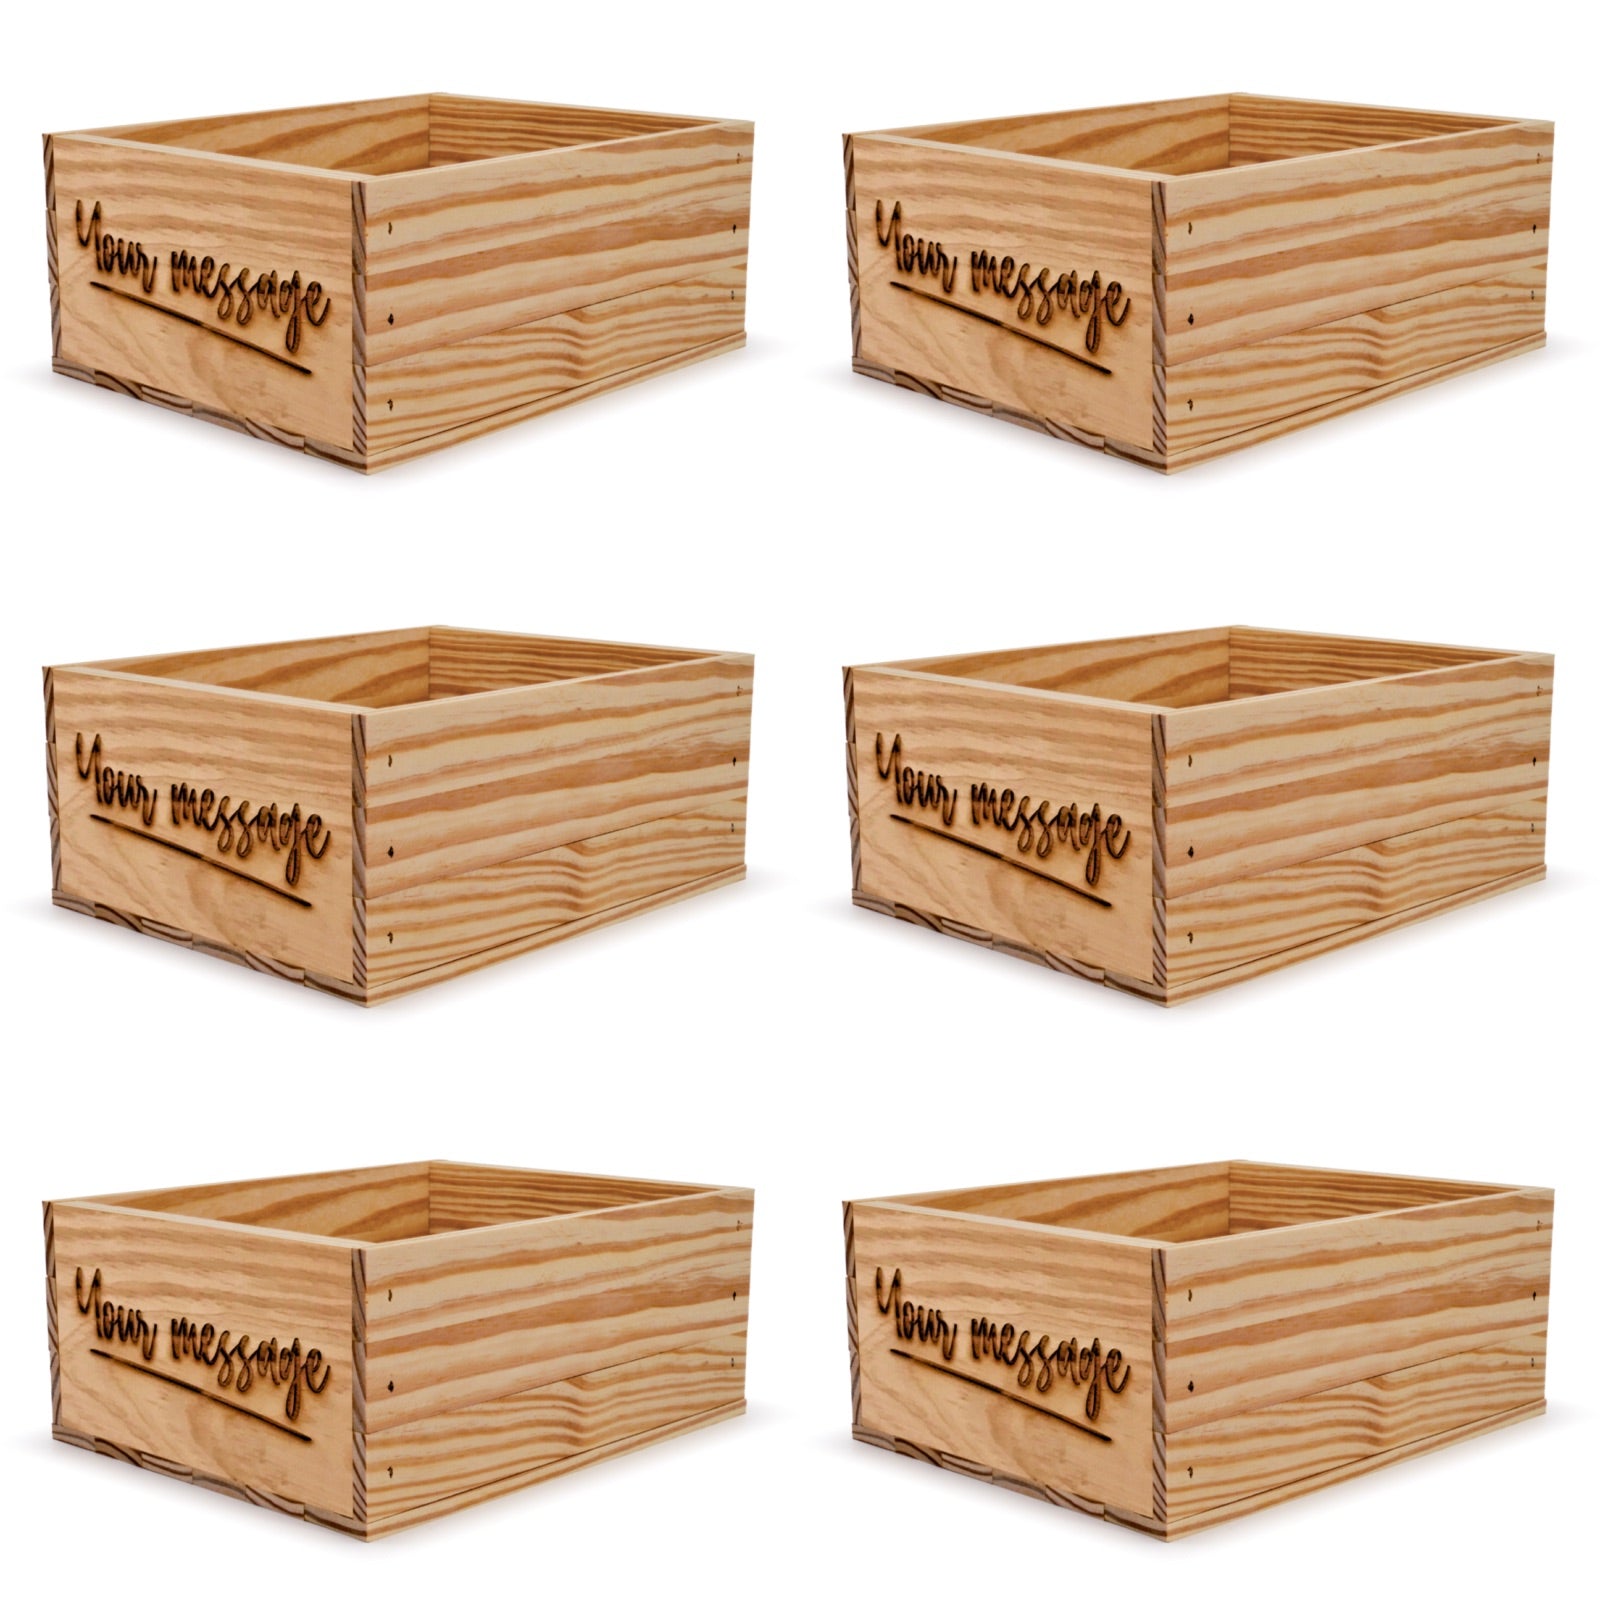 6 Small wooden crates with custom message 12x9.75x5.25